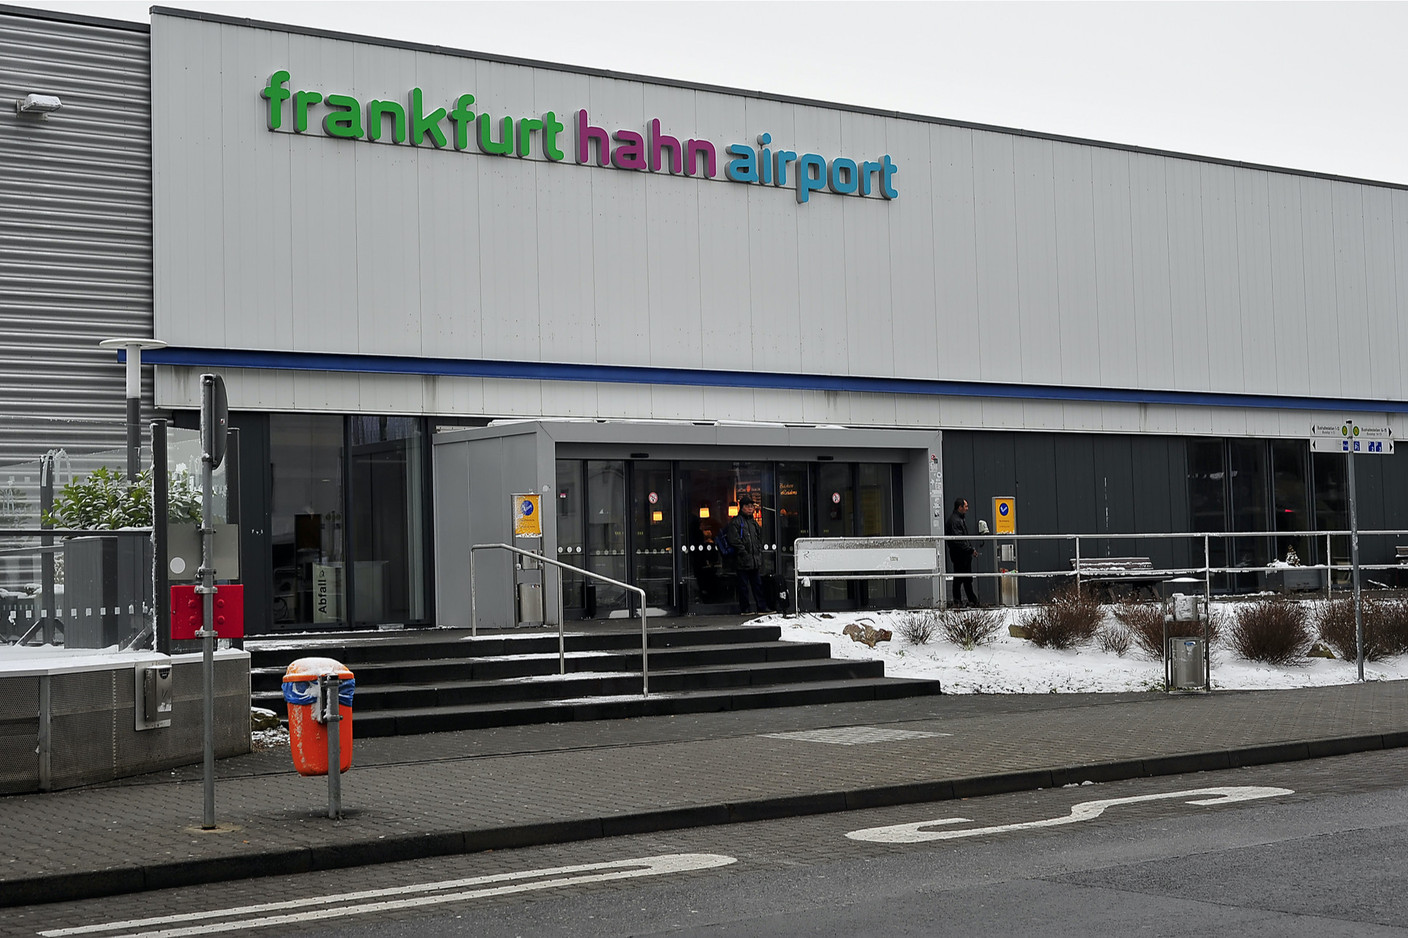 Frankfurt Hahn Airport has been hit hard by covid-related travel restrictions and has been placed in receivership. (Photo: Shutterstock)